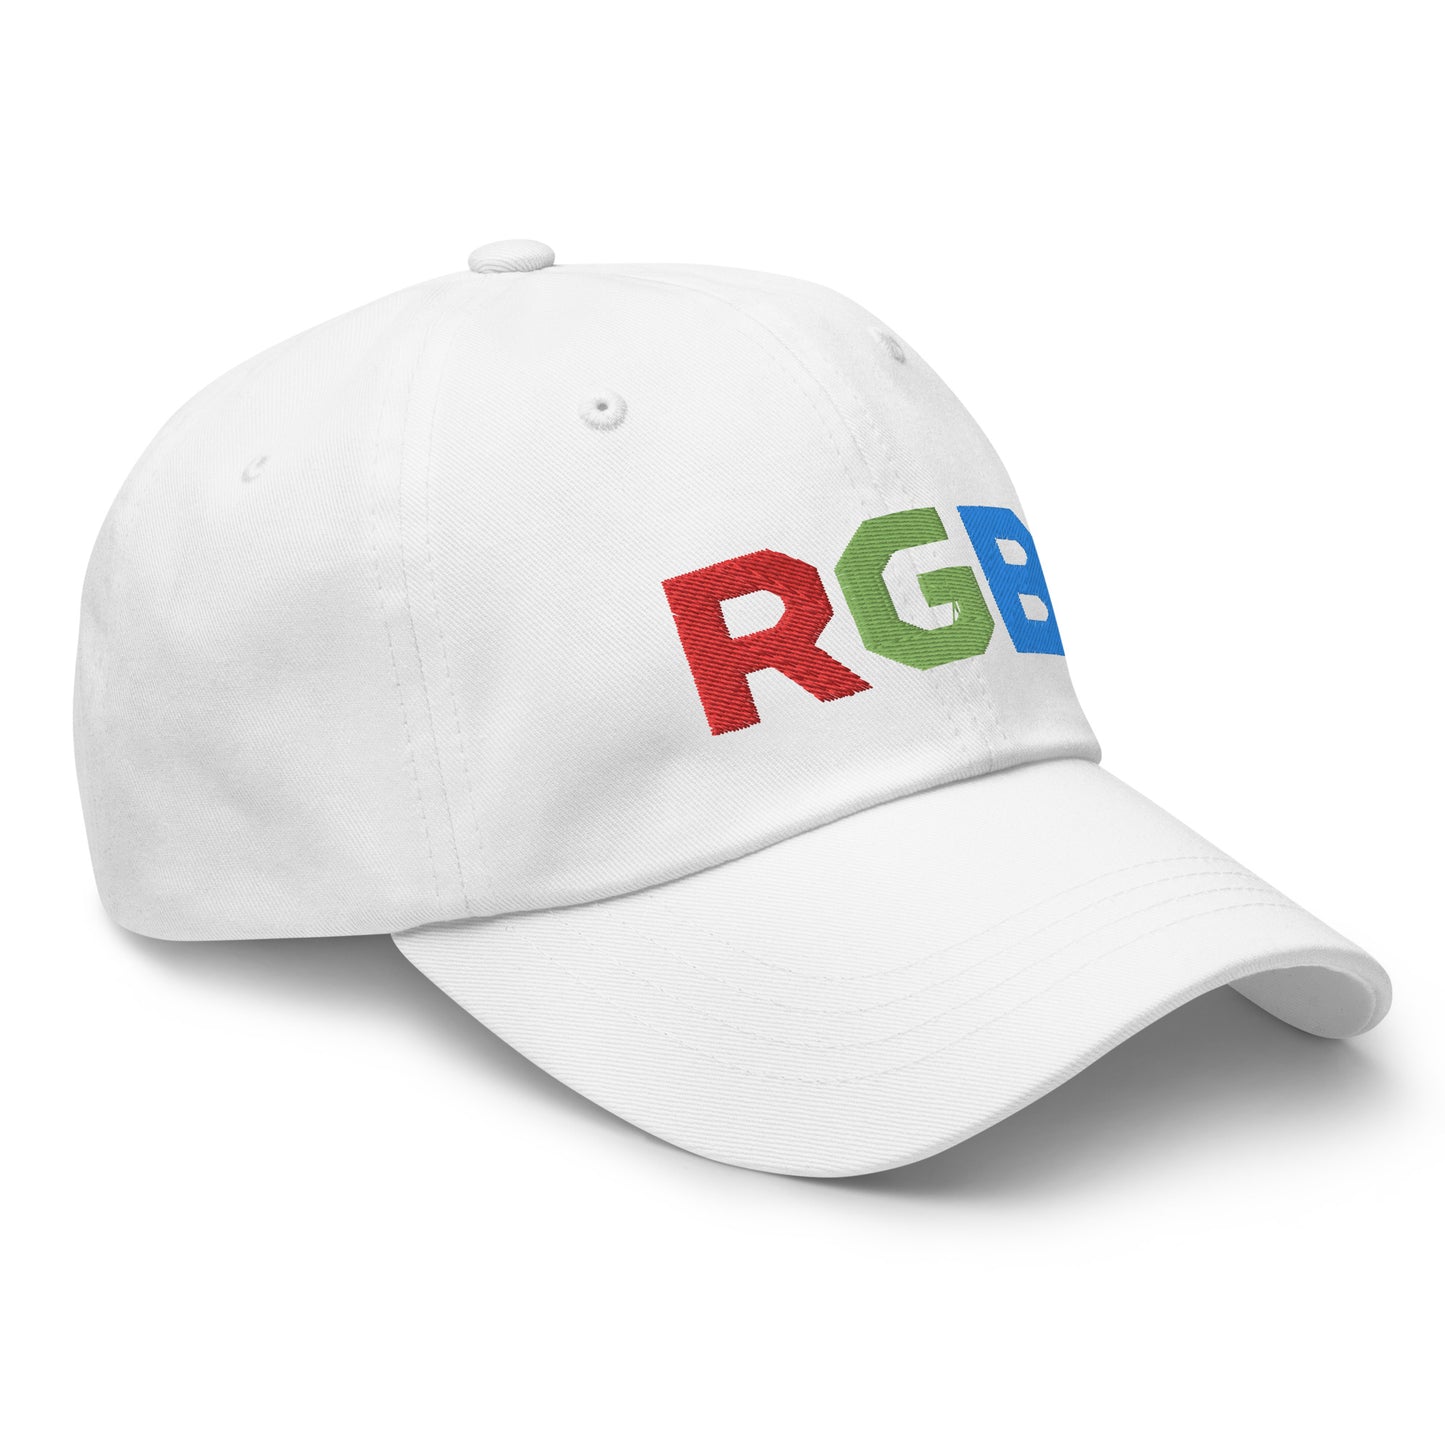 RGB Embroidered Dad hat